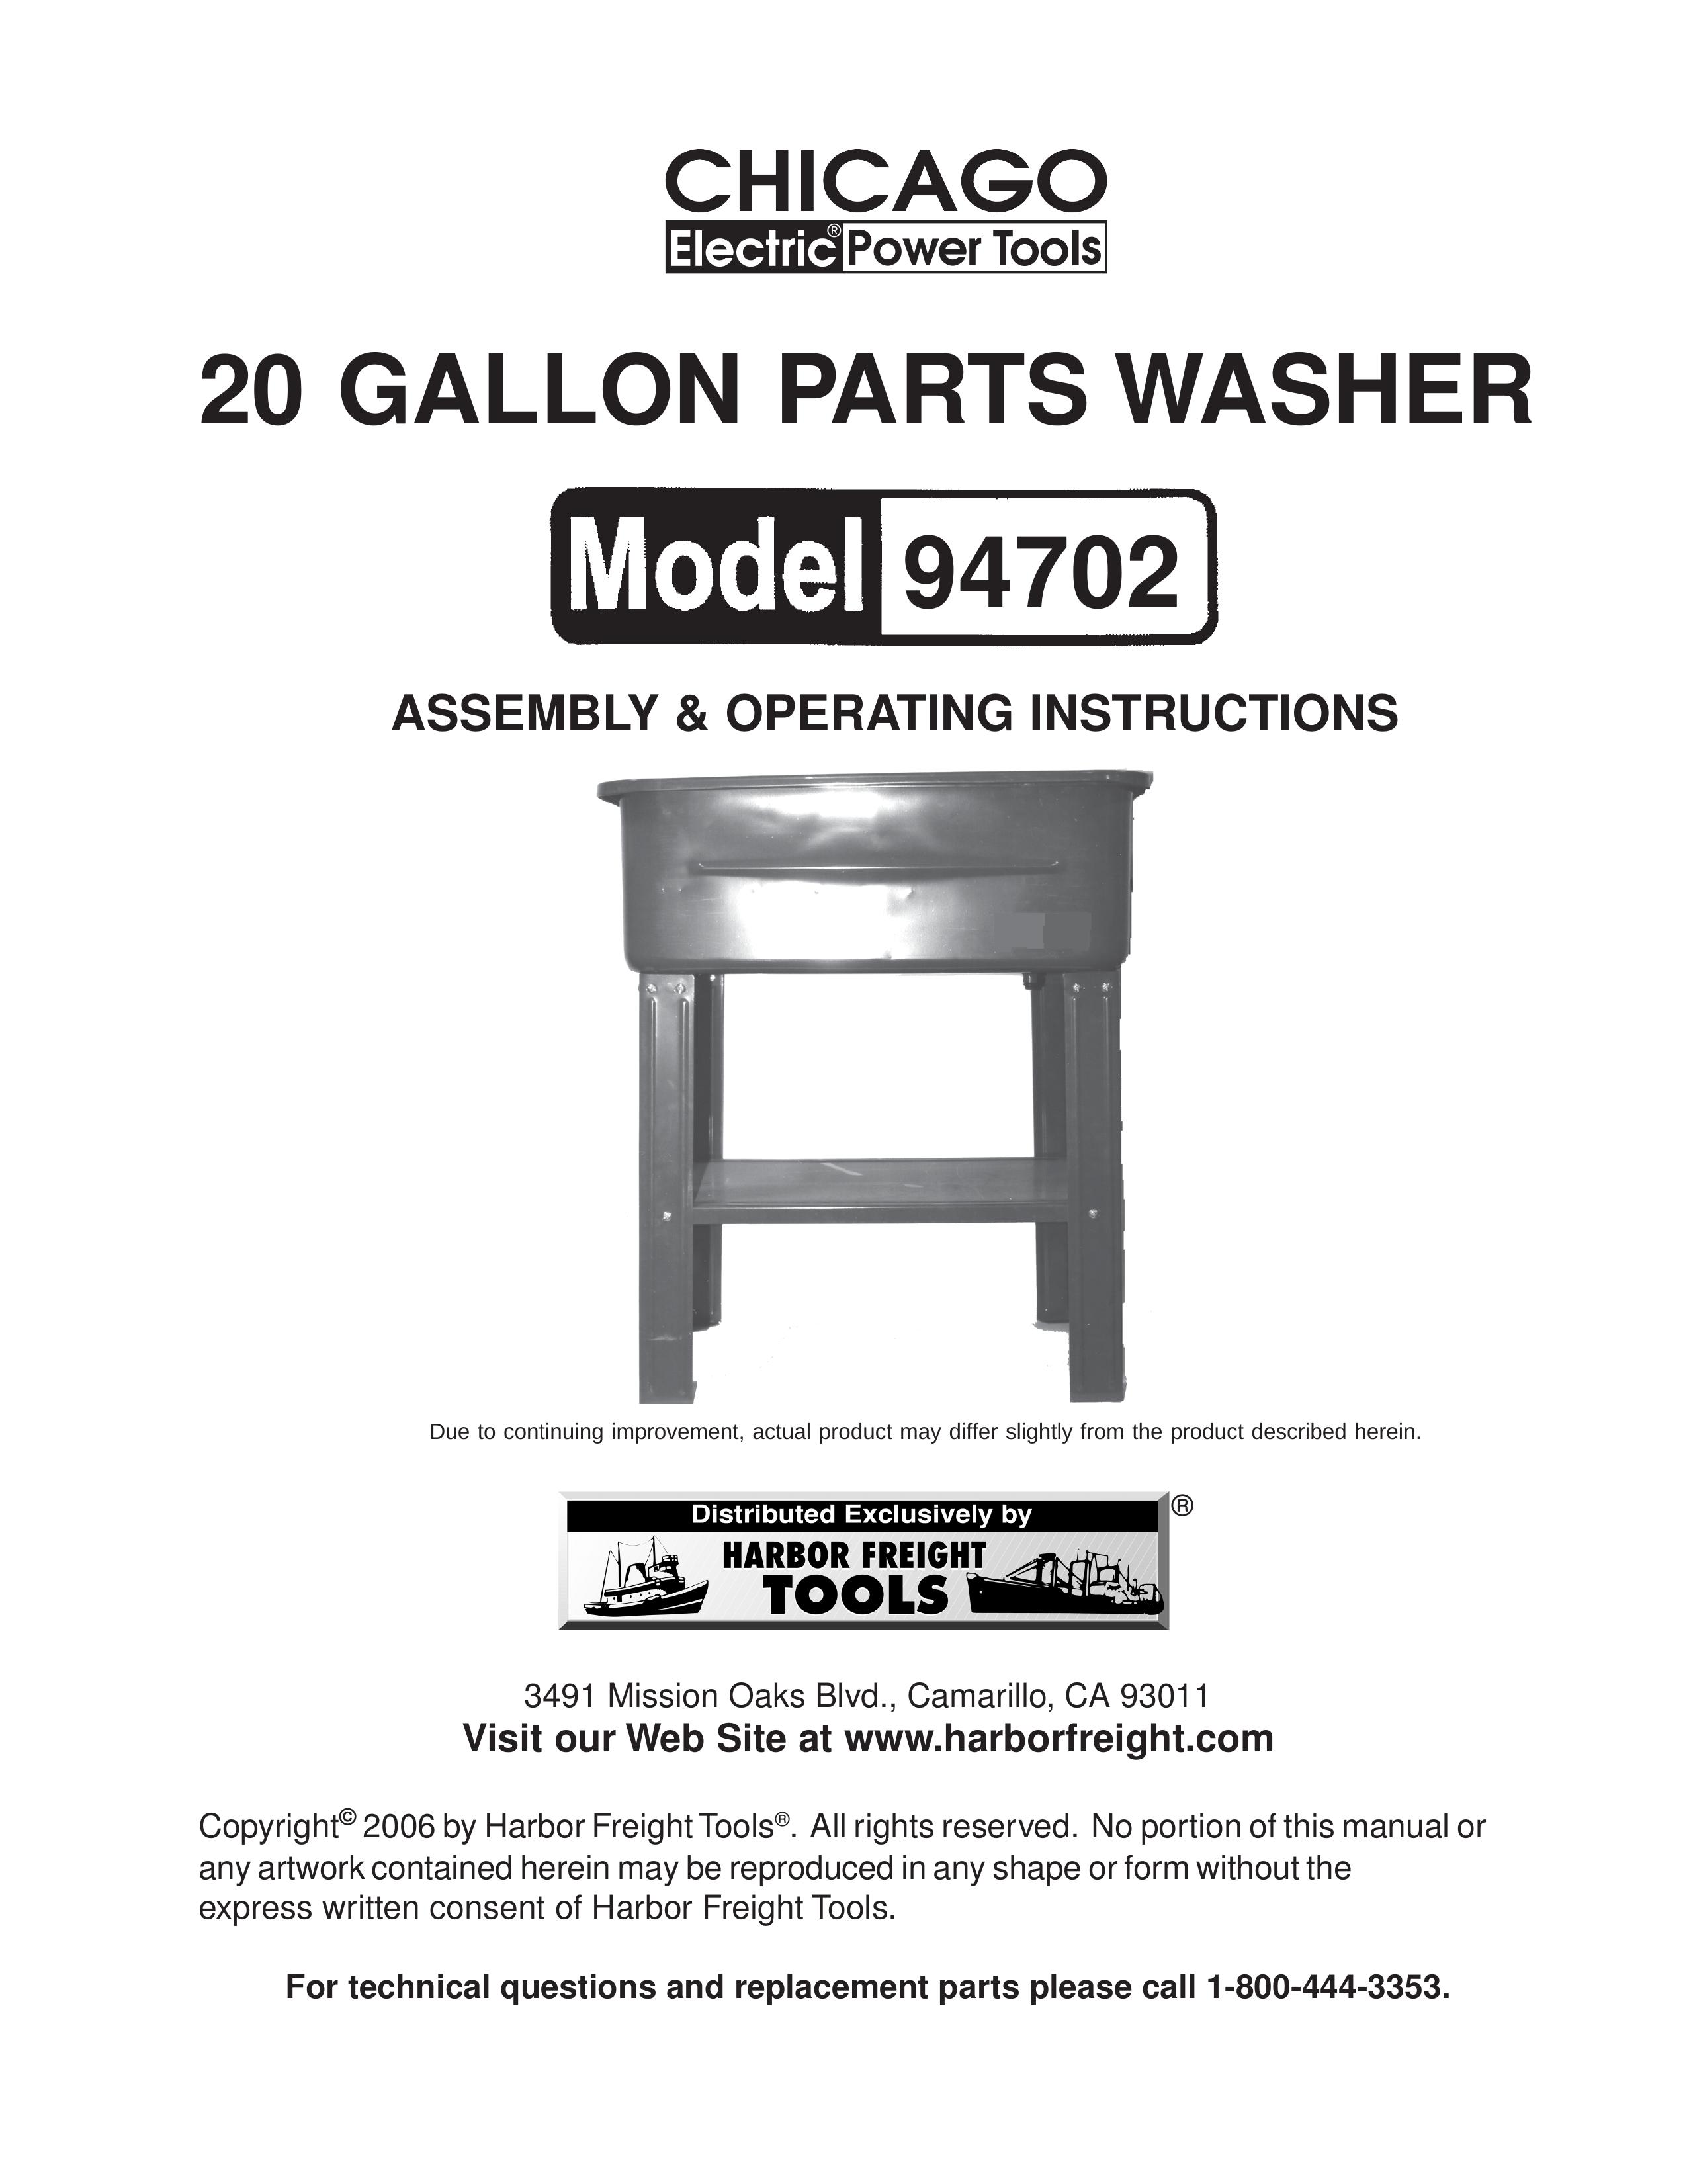 Chicago Electric 20 Gallon Parts Washer Washer User Manual